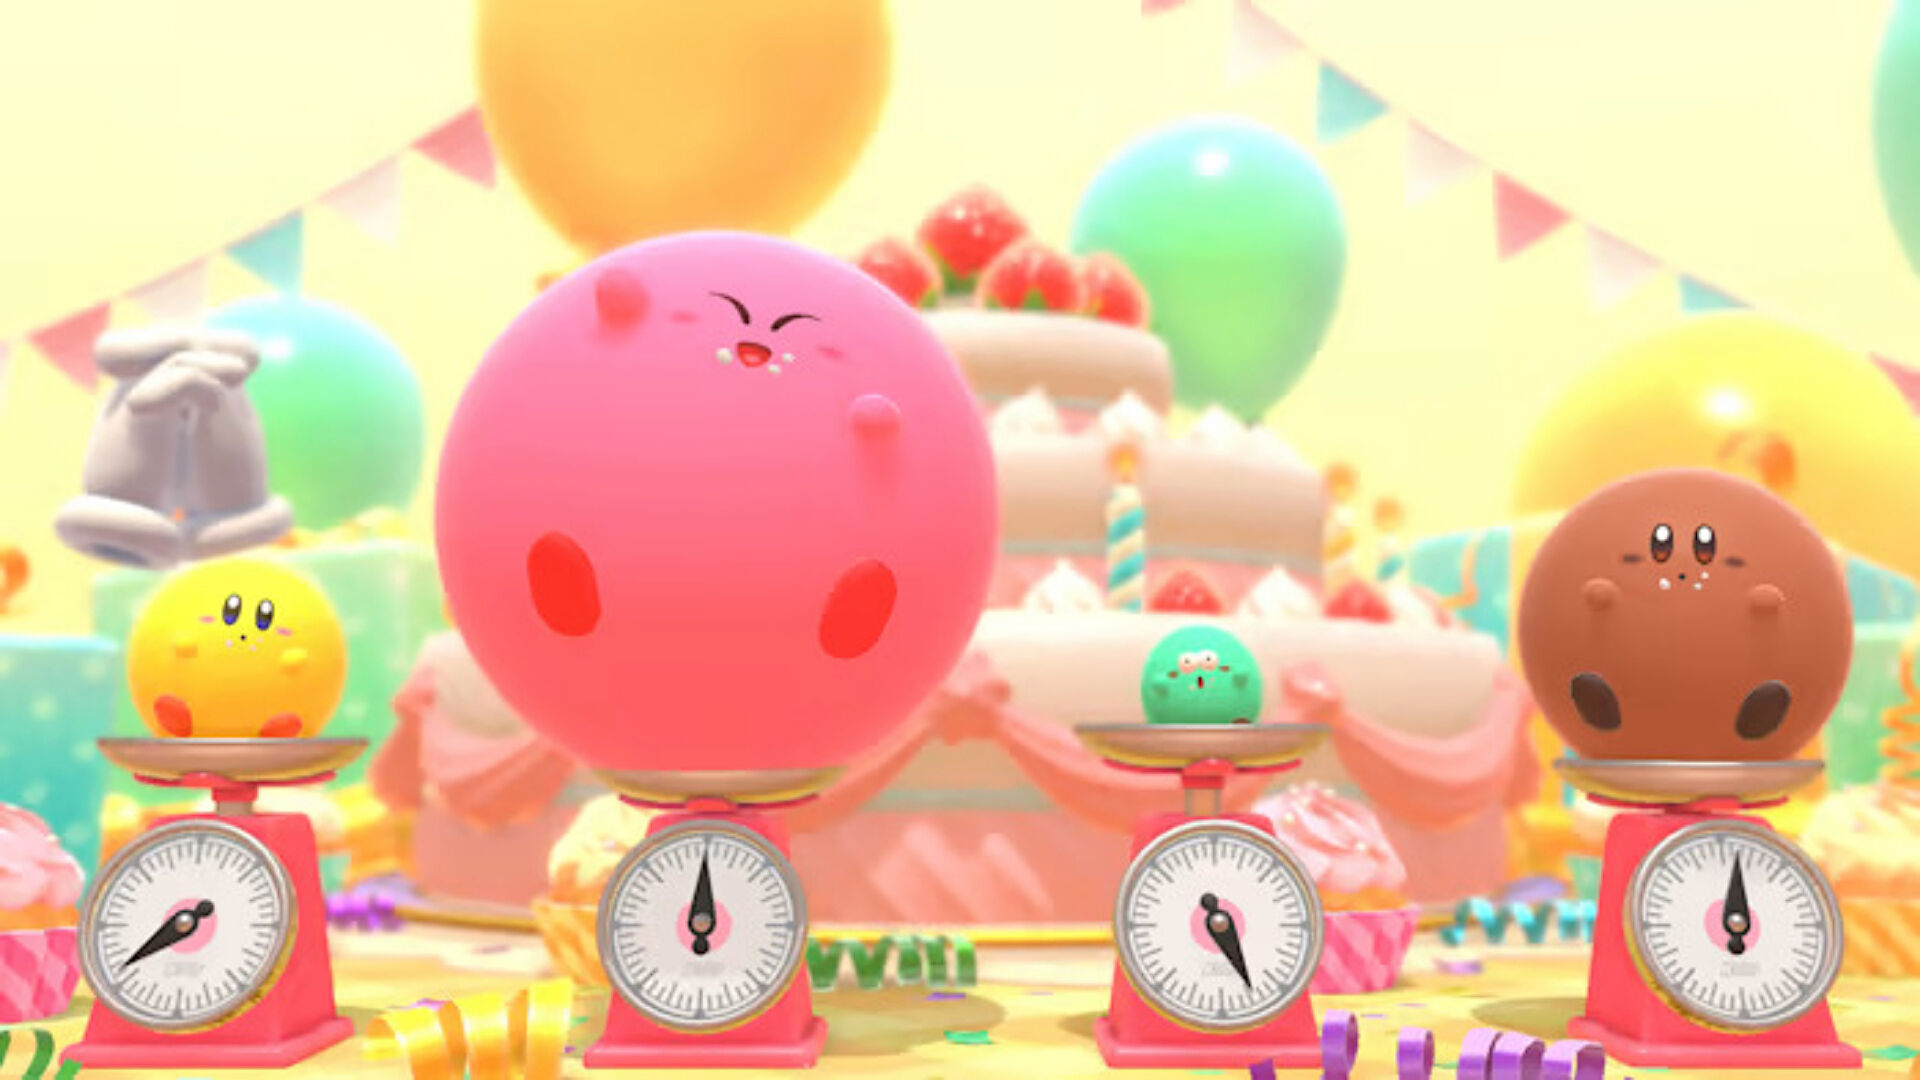 Kirby’s Dream Buffet is all about inhaling sweet treats, and releases next week